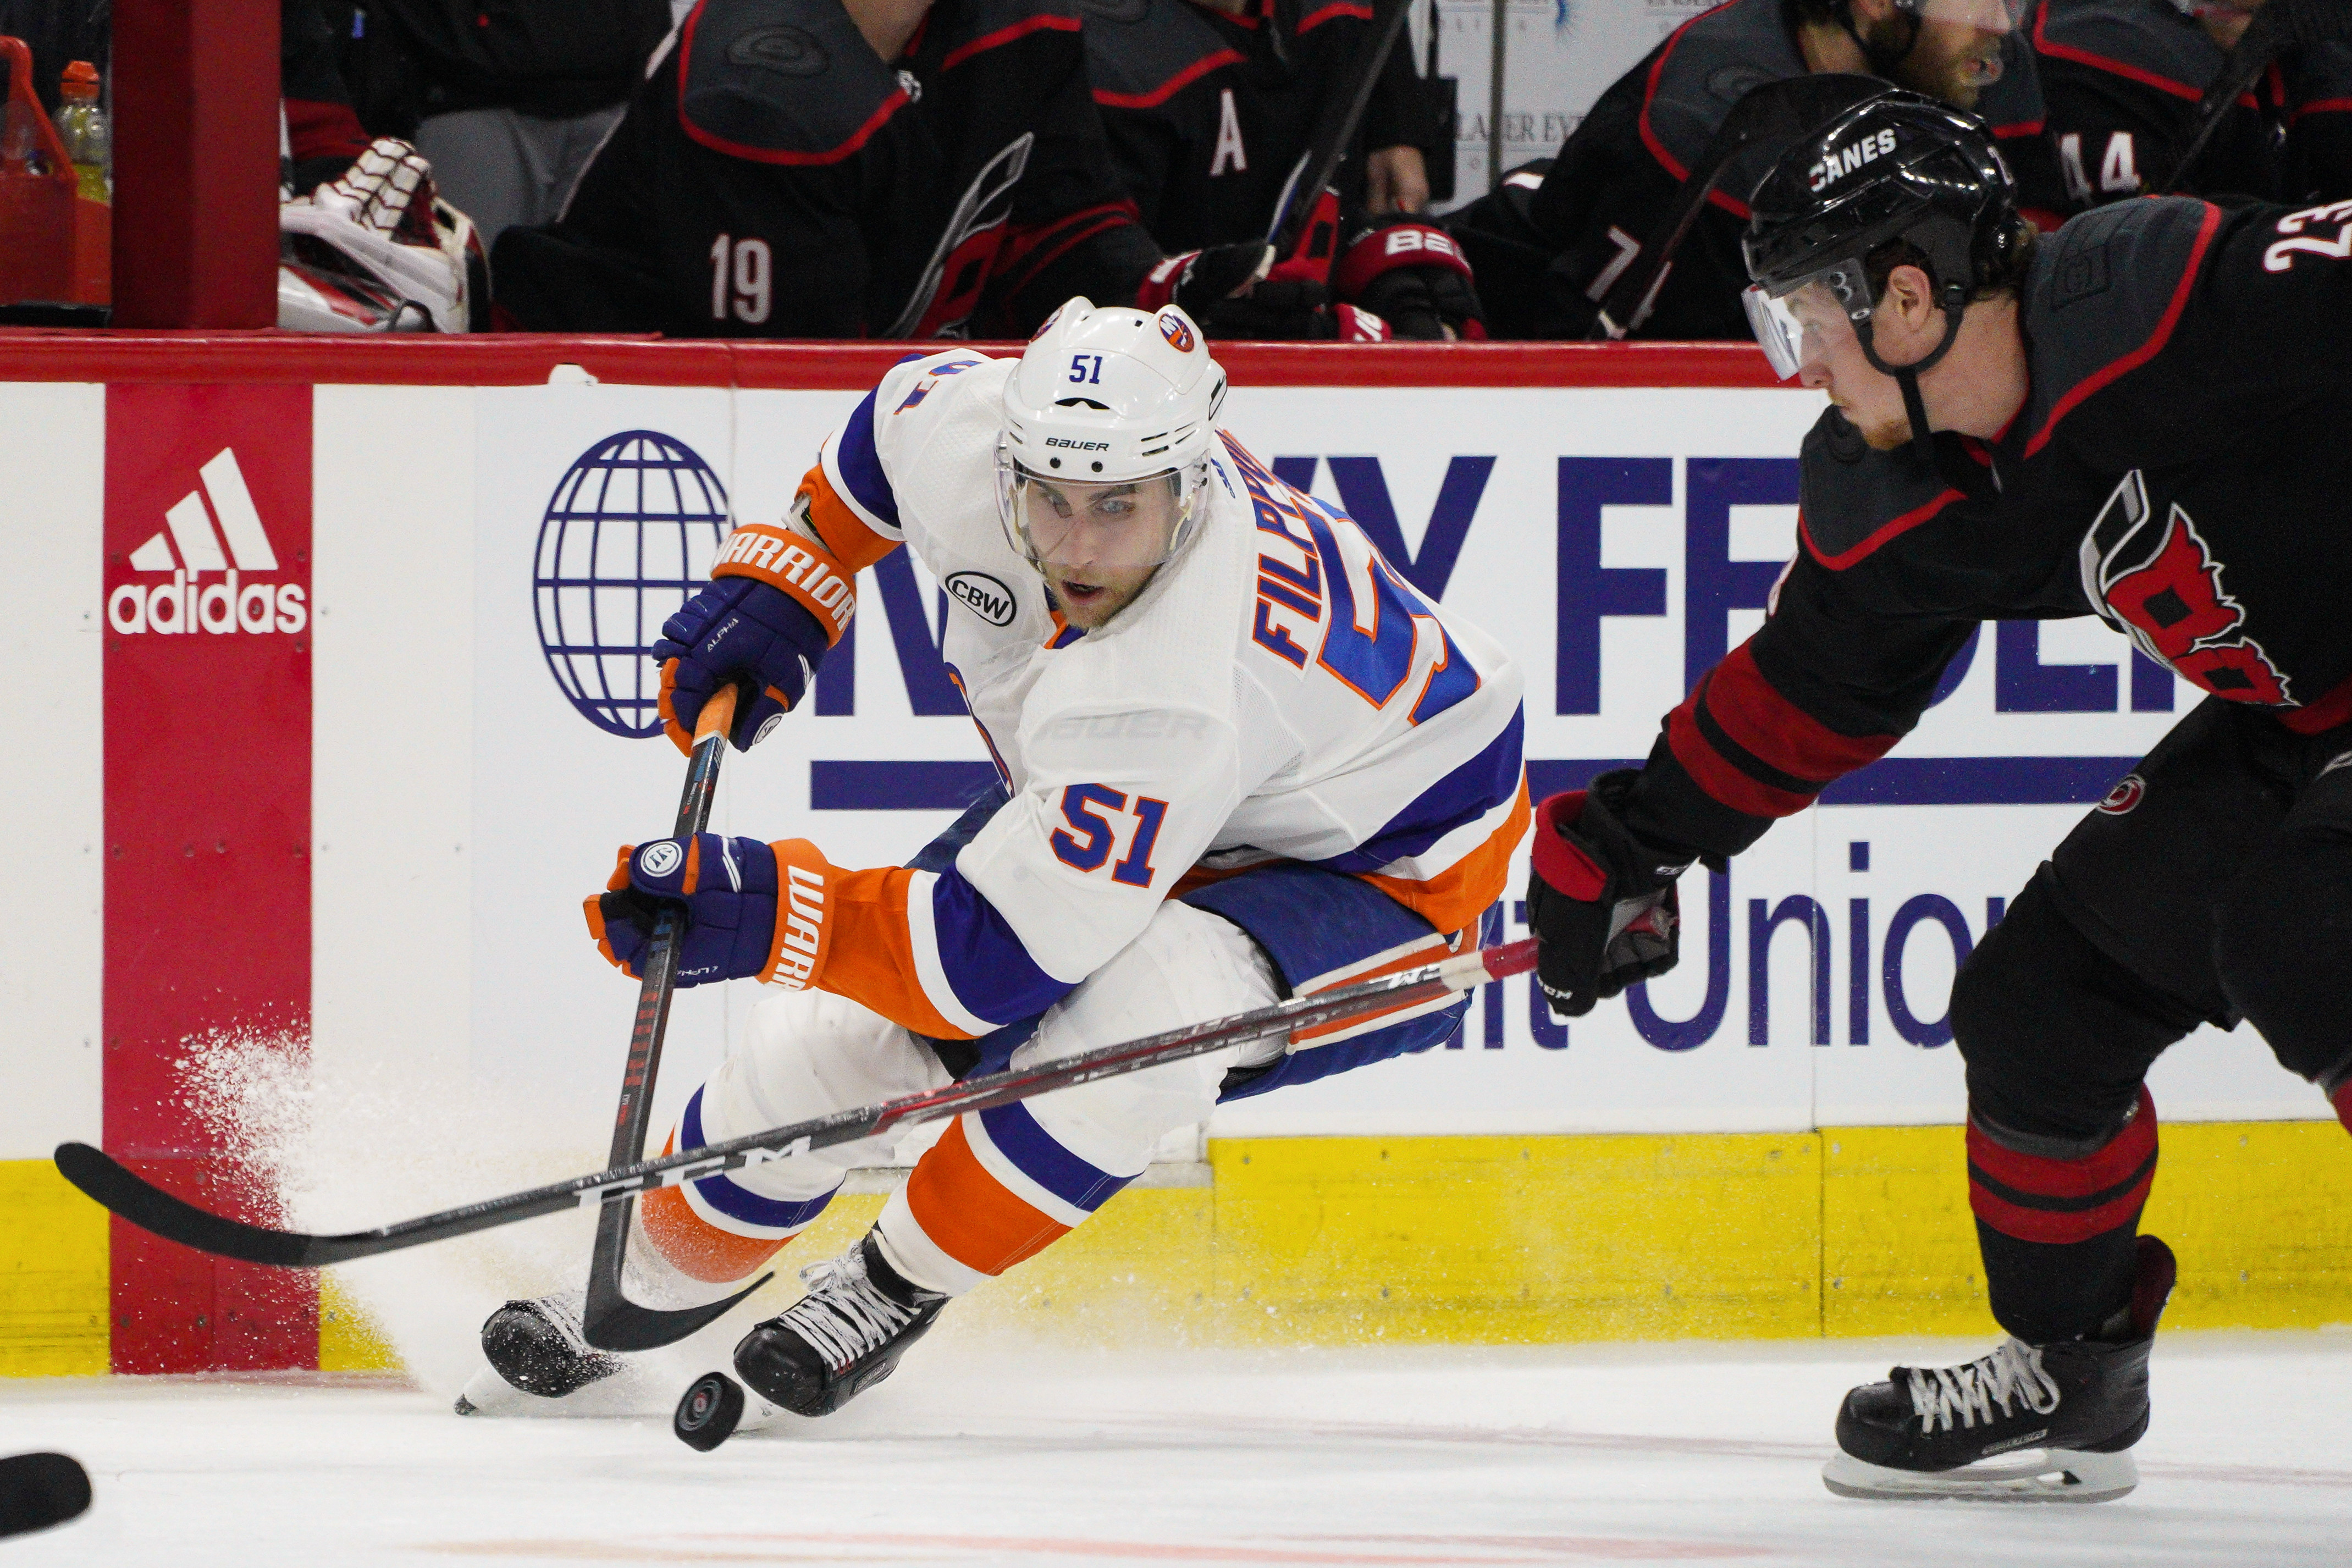 NHL: MAY 01 Stanley Cup Playoffs Second Round - Islanders at Hurricanes